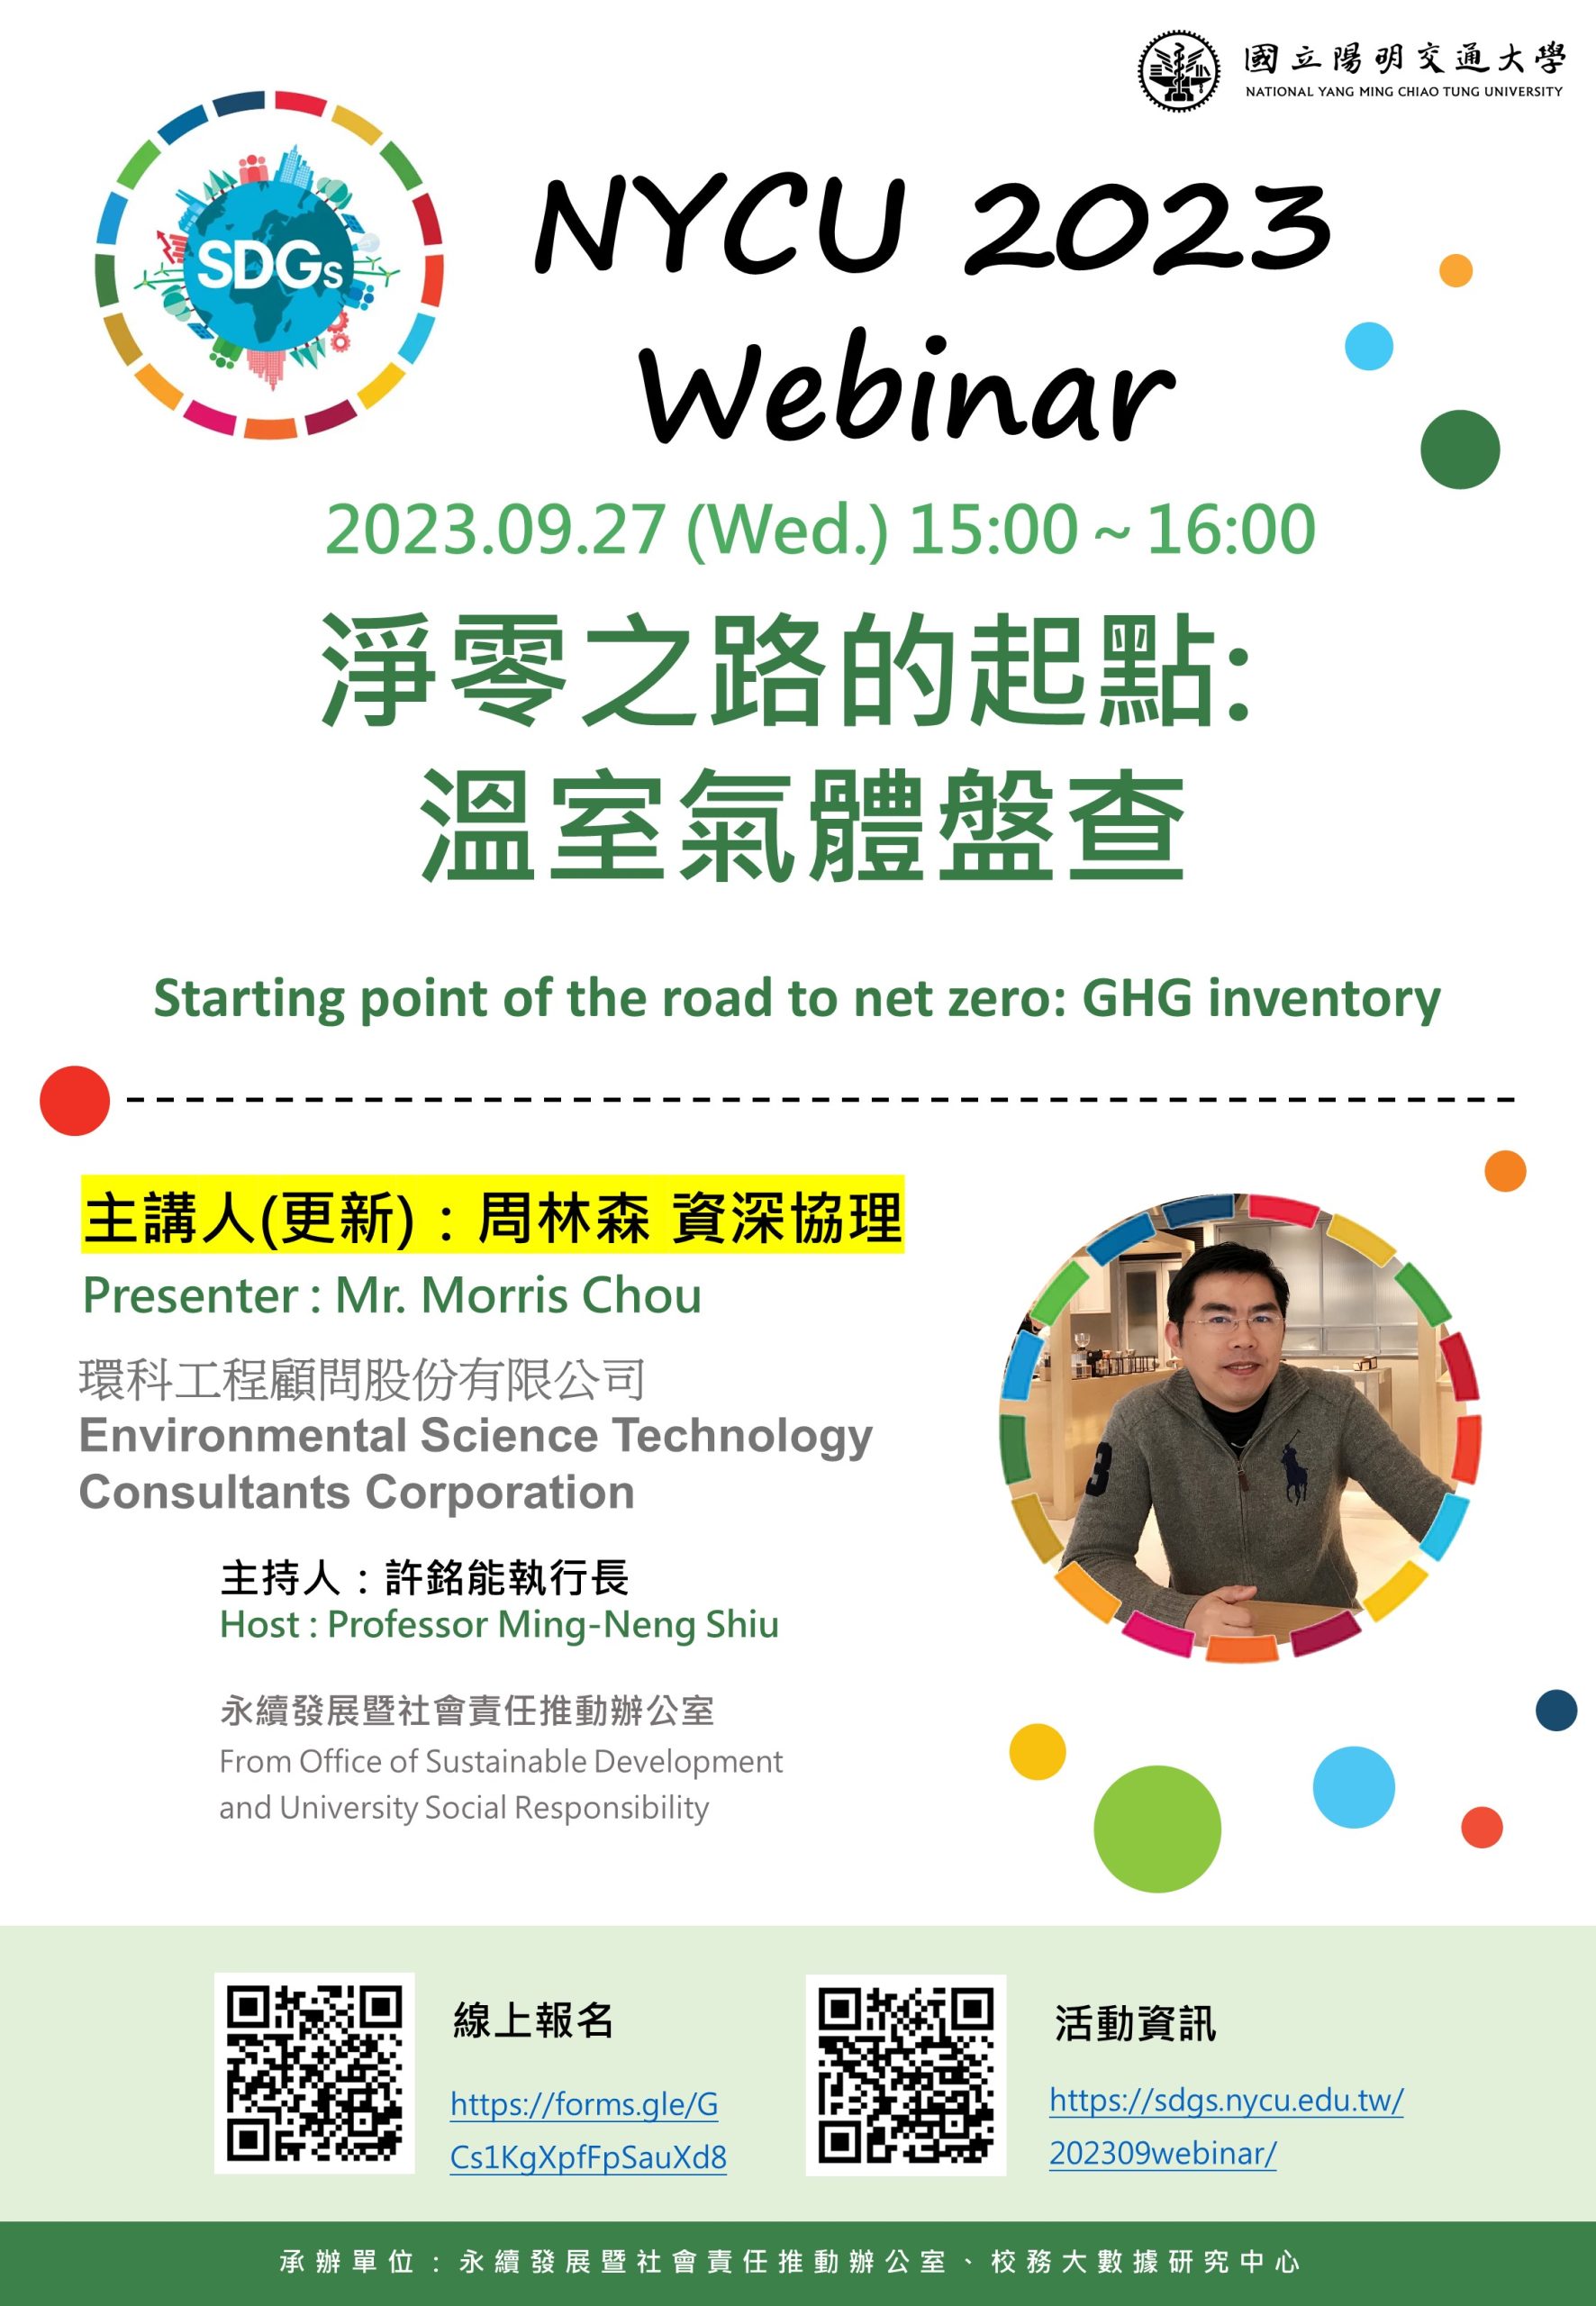 【WEBINAR】Starting point of the road to net zero: GHG inventory